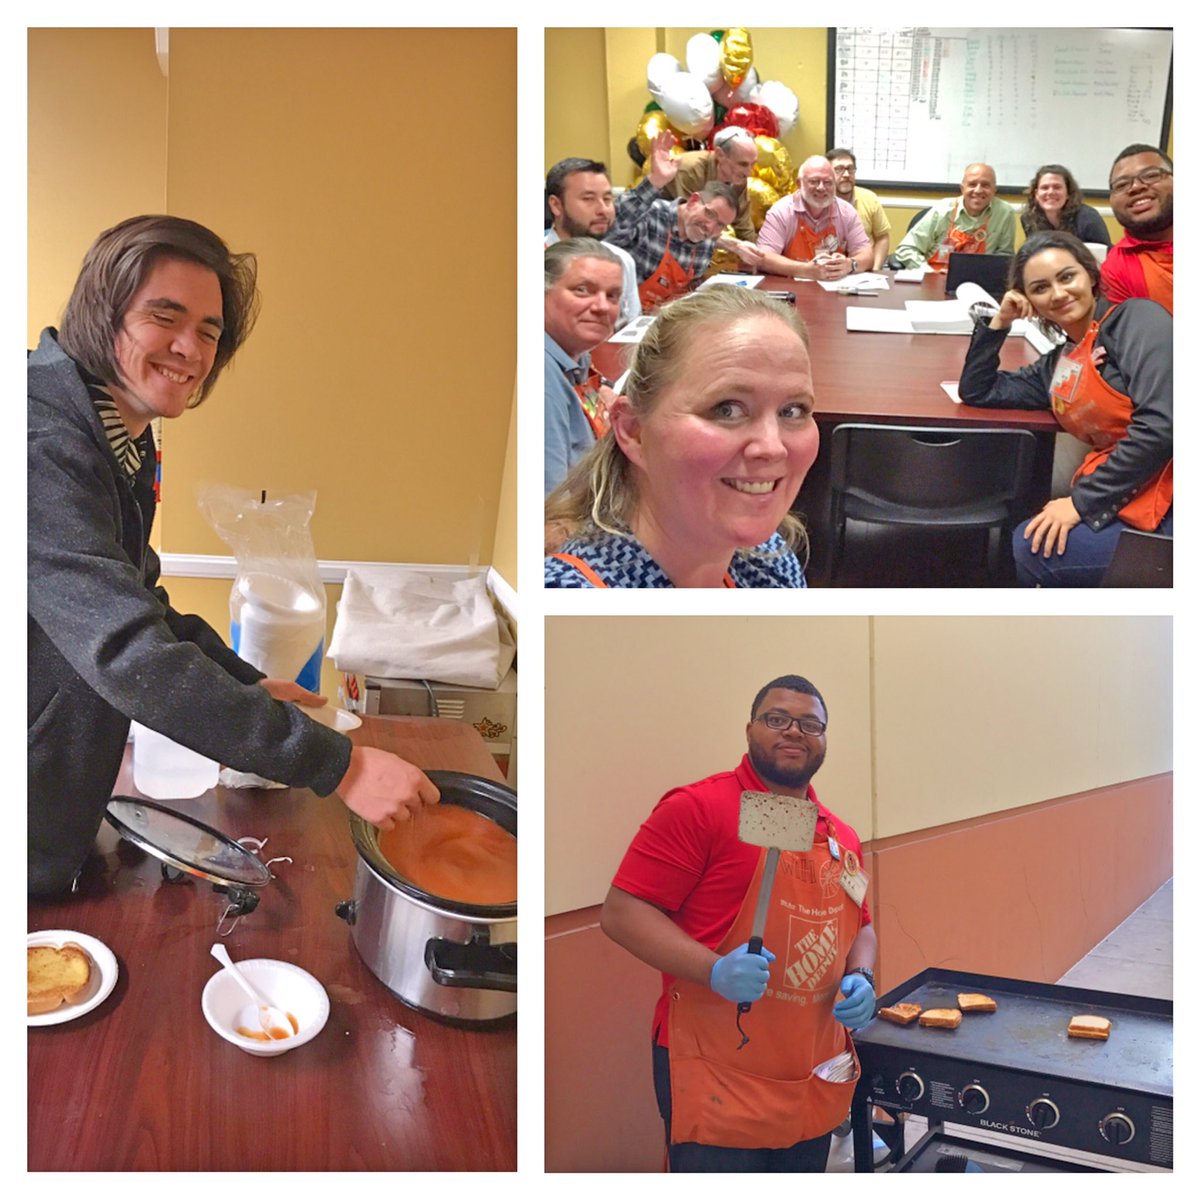 Who's 150 days safe??? That's right @homedepot6668 is!  We celebrated today with grilled cheese and tomato soup.  #workingsafe #safetyselfie @PacSouth @LKRTHD #saycheesewere150dayssafe @HDLMPerez